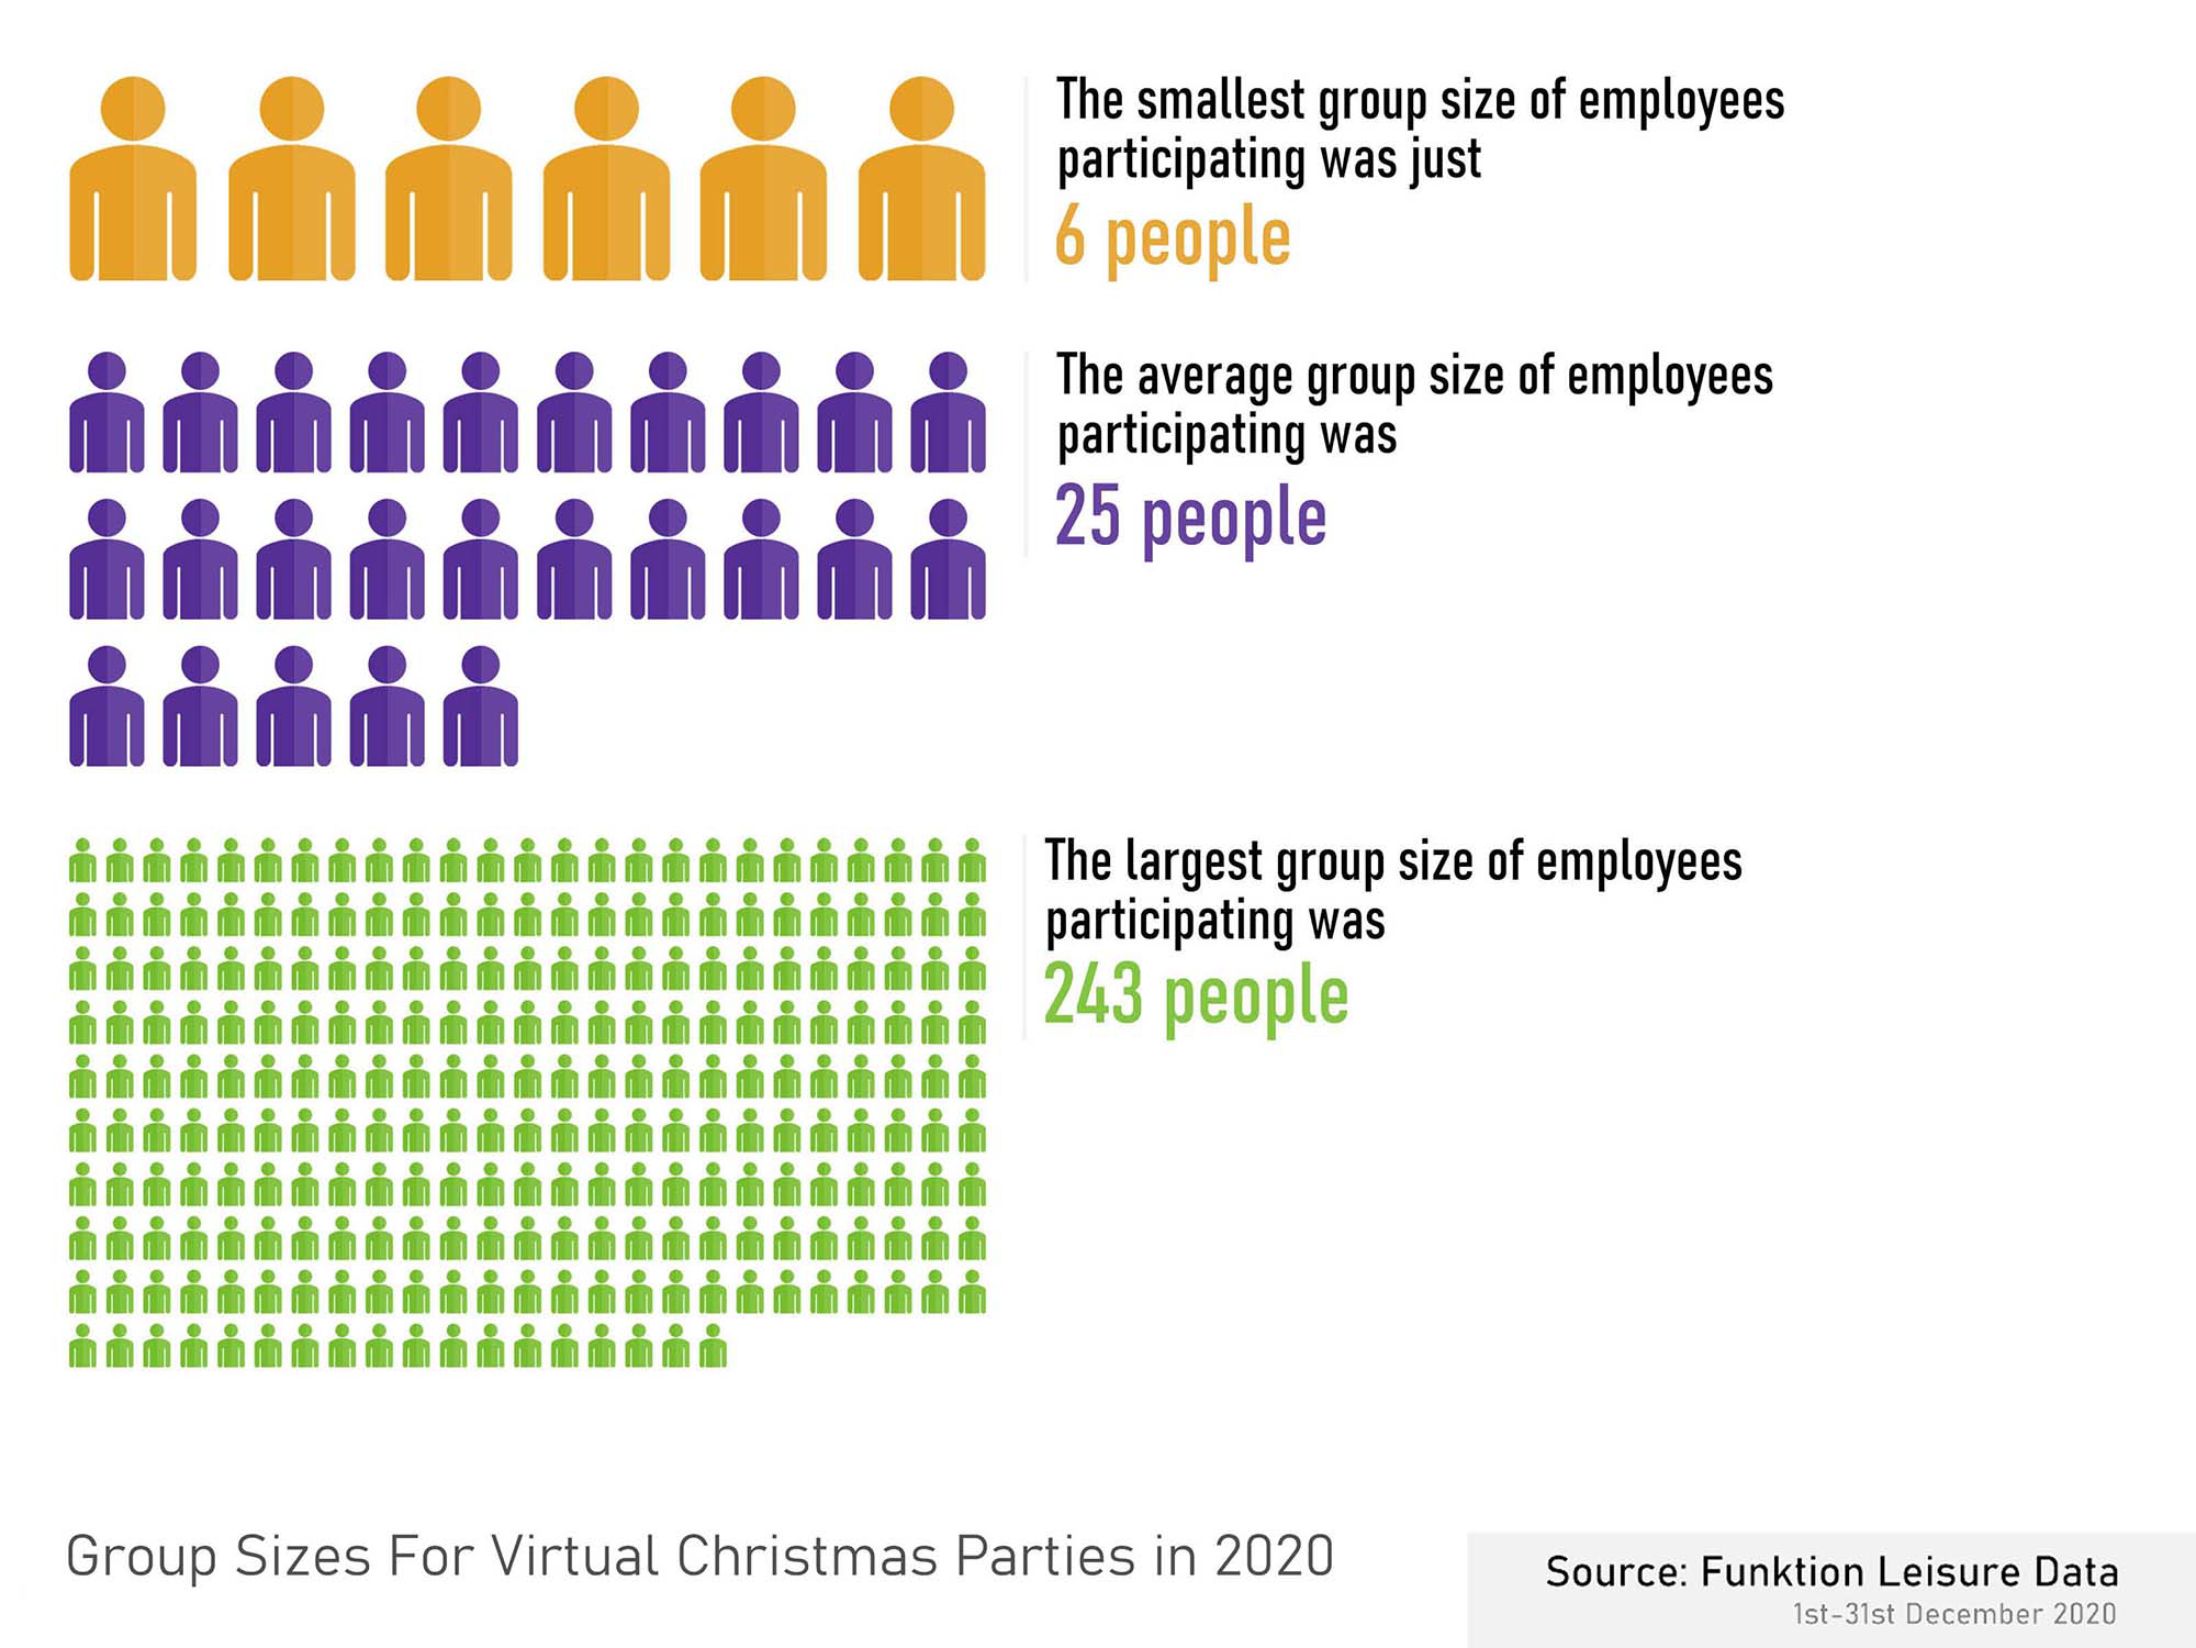 Group Sizes for Virtual Christmas Parties in 2020